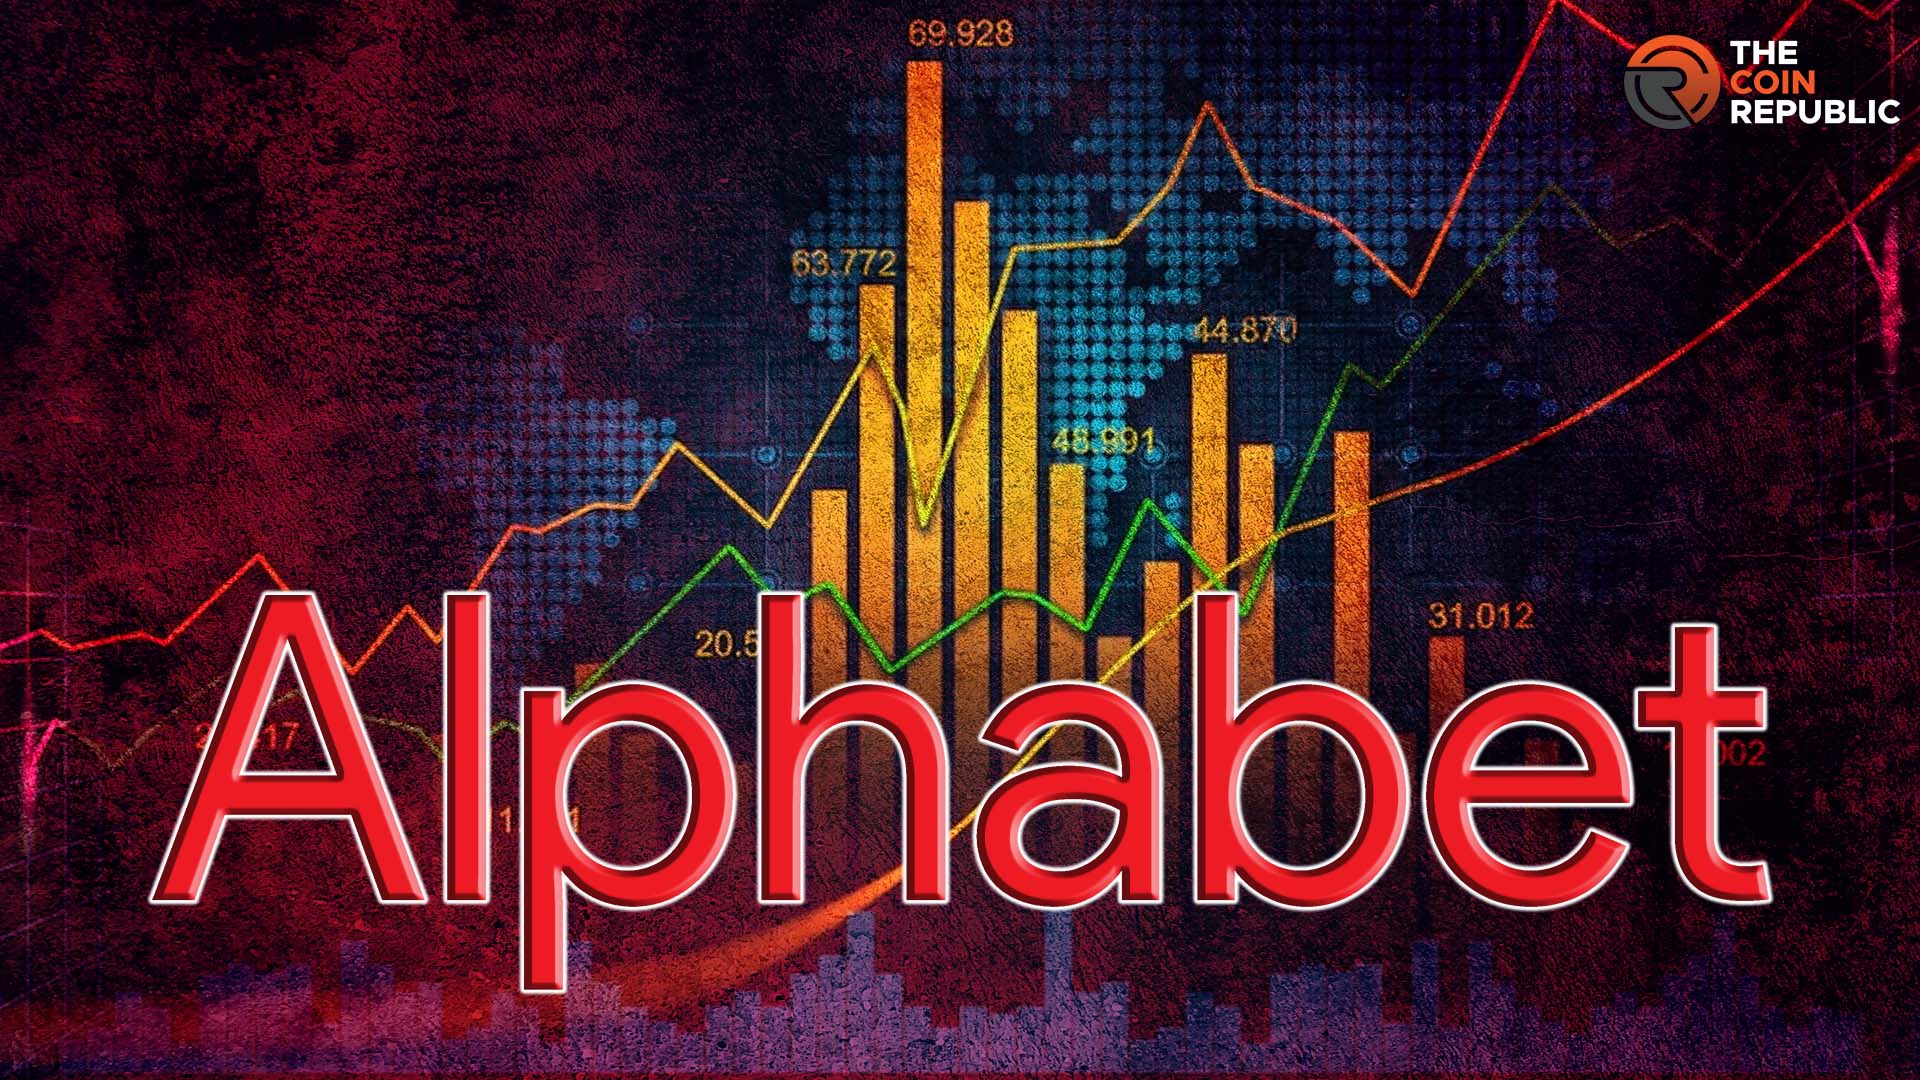 Alphabet Inc. (GOOG Stock) – Fed Meeting Could Alter the Rally